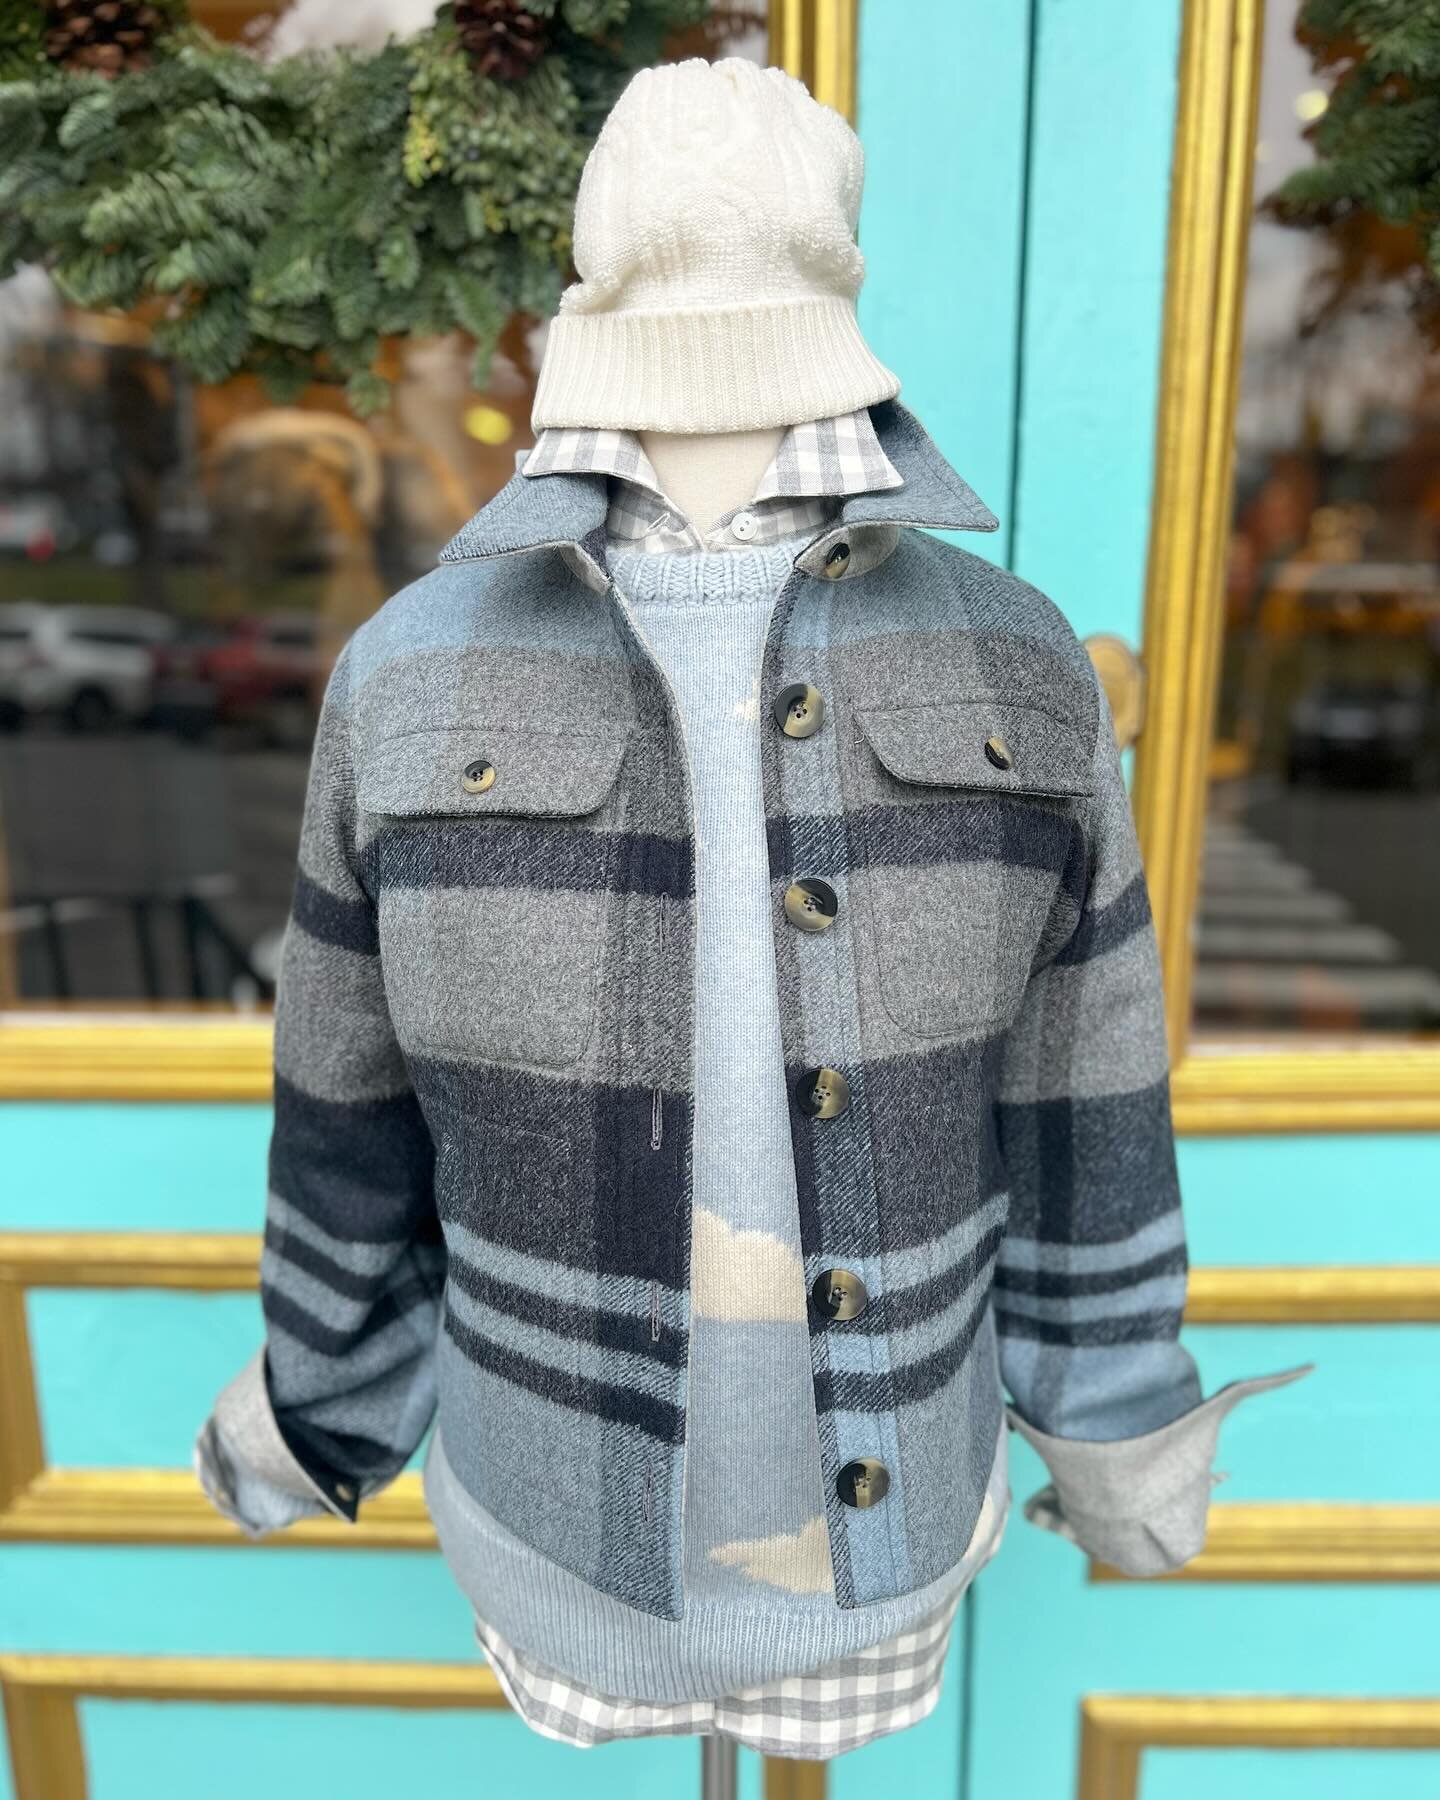 The SHACKET &mdash; is it a more of a shirt or a jacket? We&rsquo;re not sure 🤔 but we&rsquo;ve included it in our 20% off shirting sale starting today through next week!